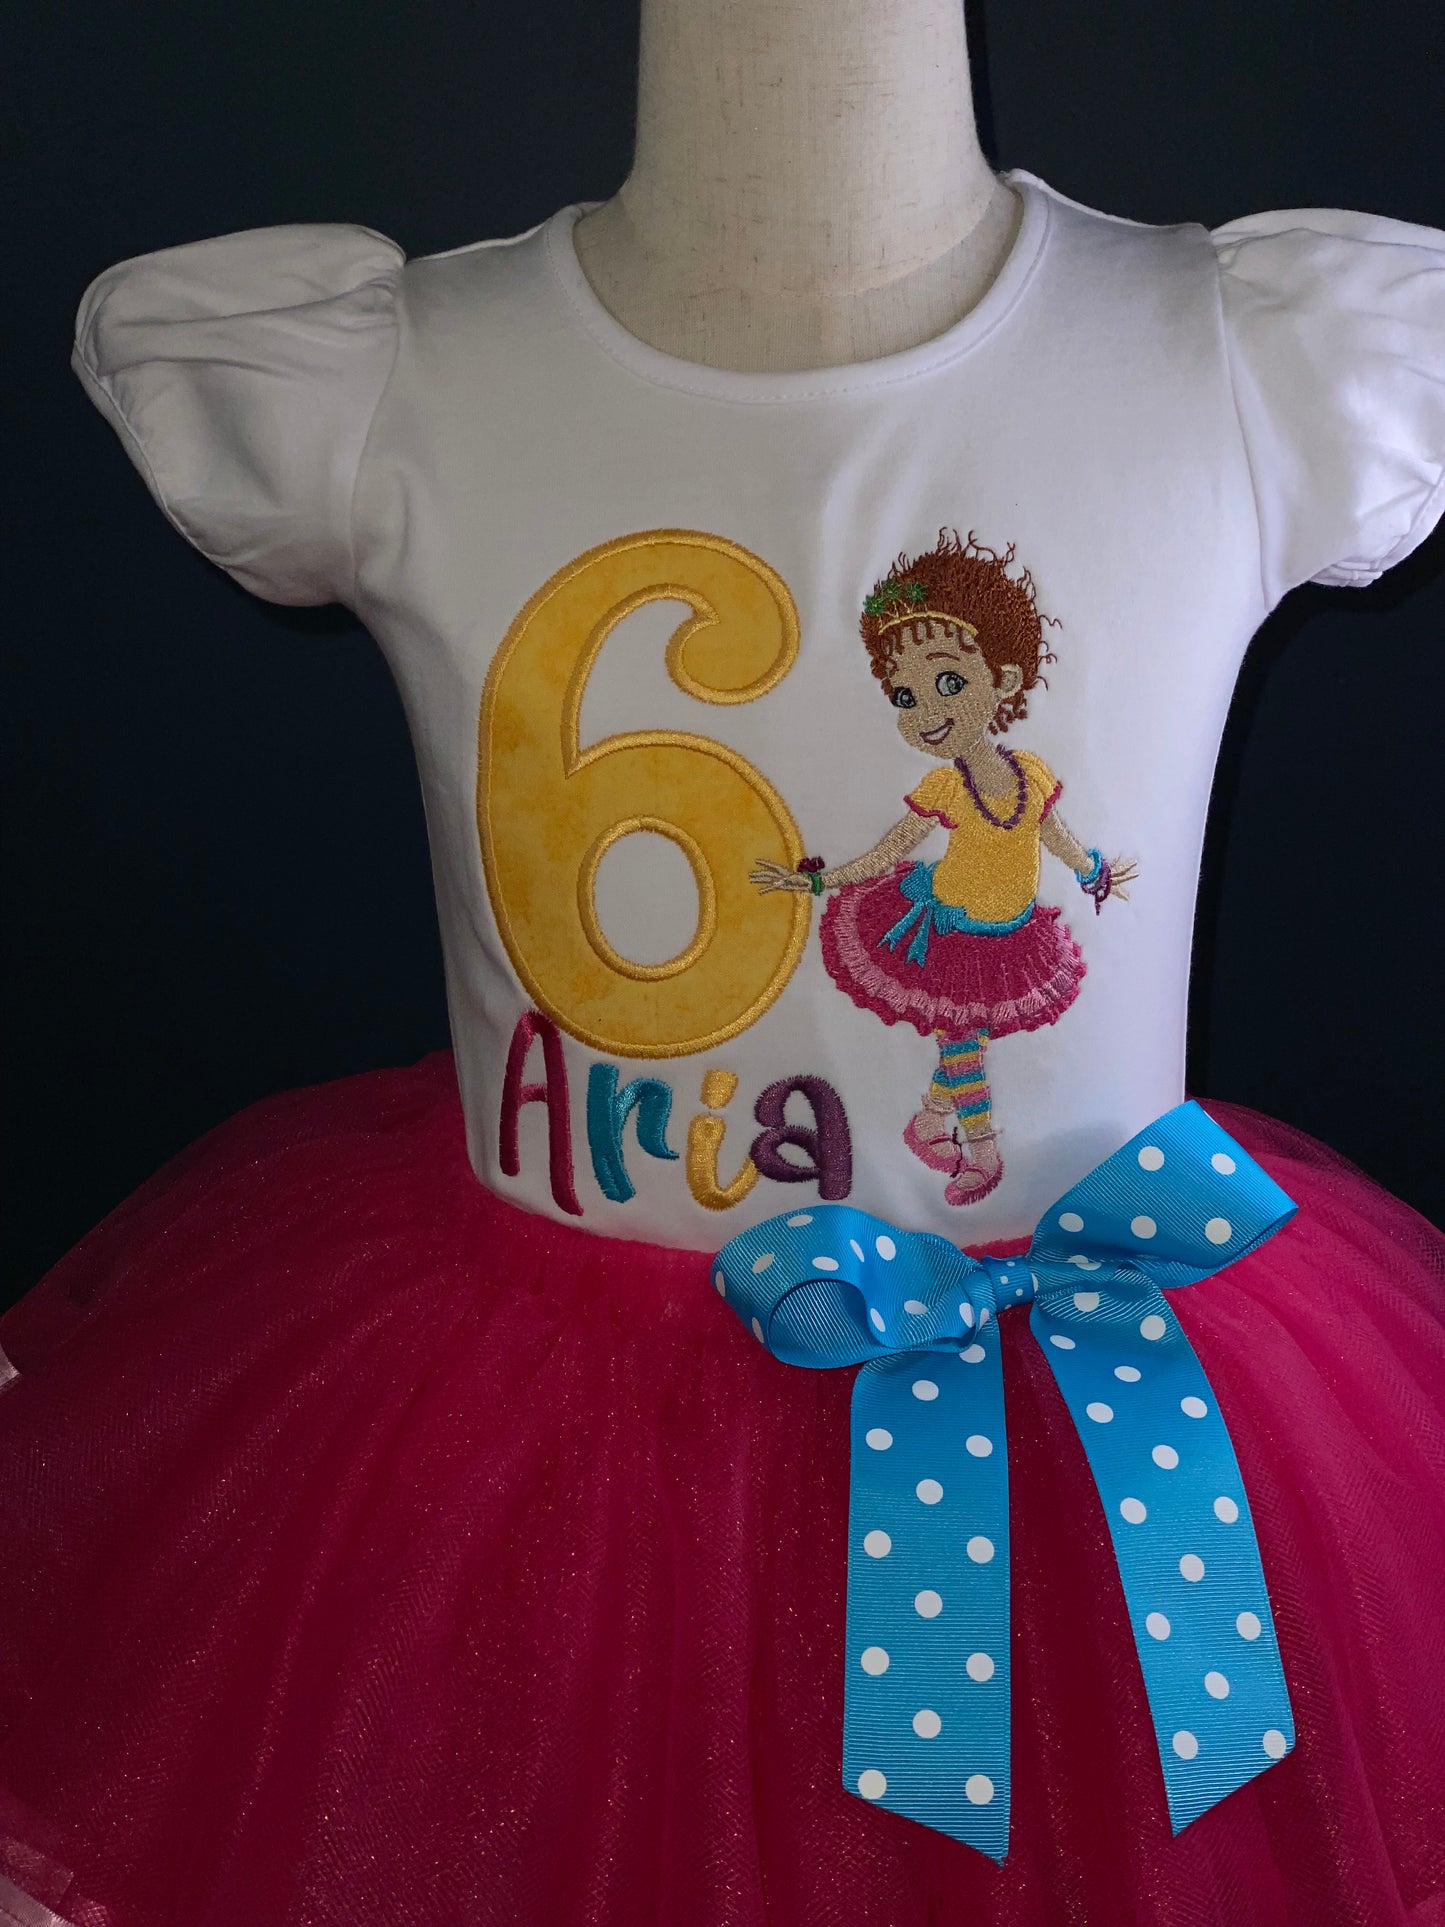 Fancy Nancy birthday party outfit for girls